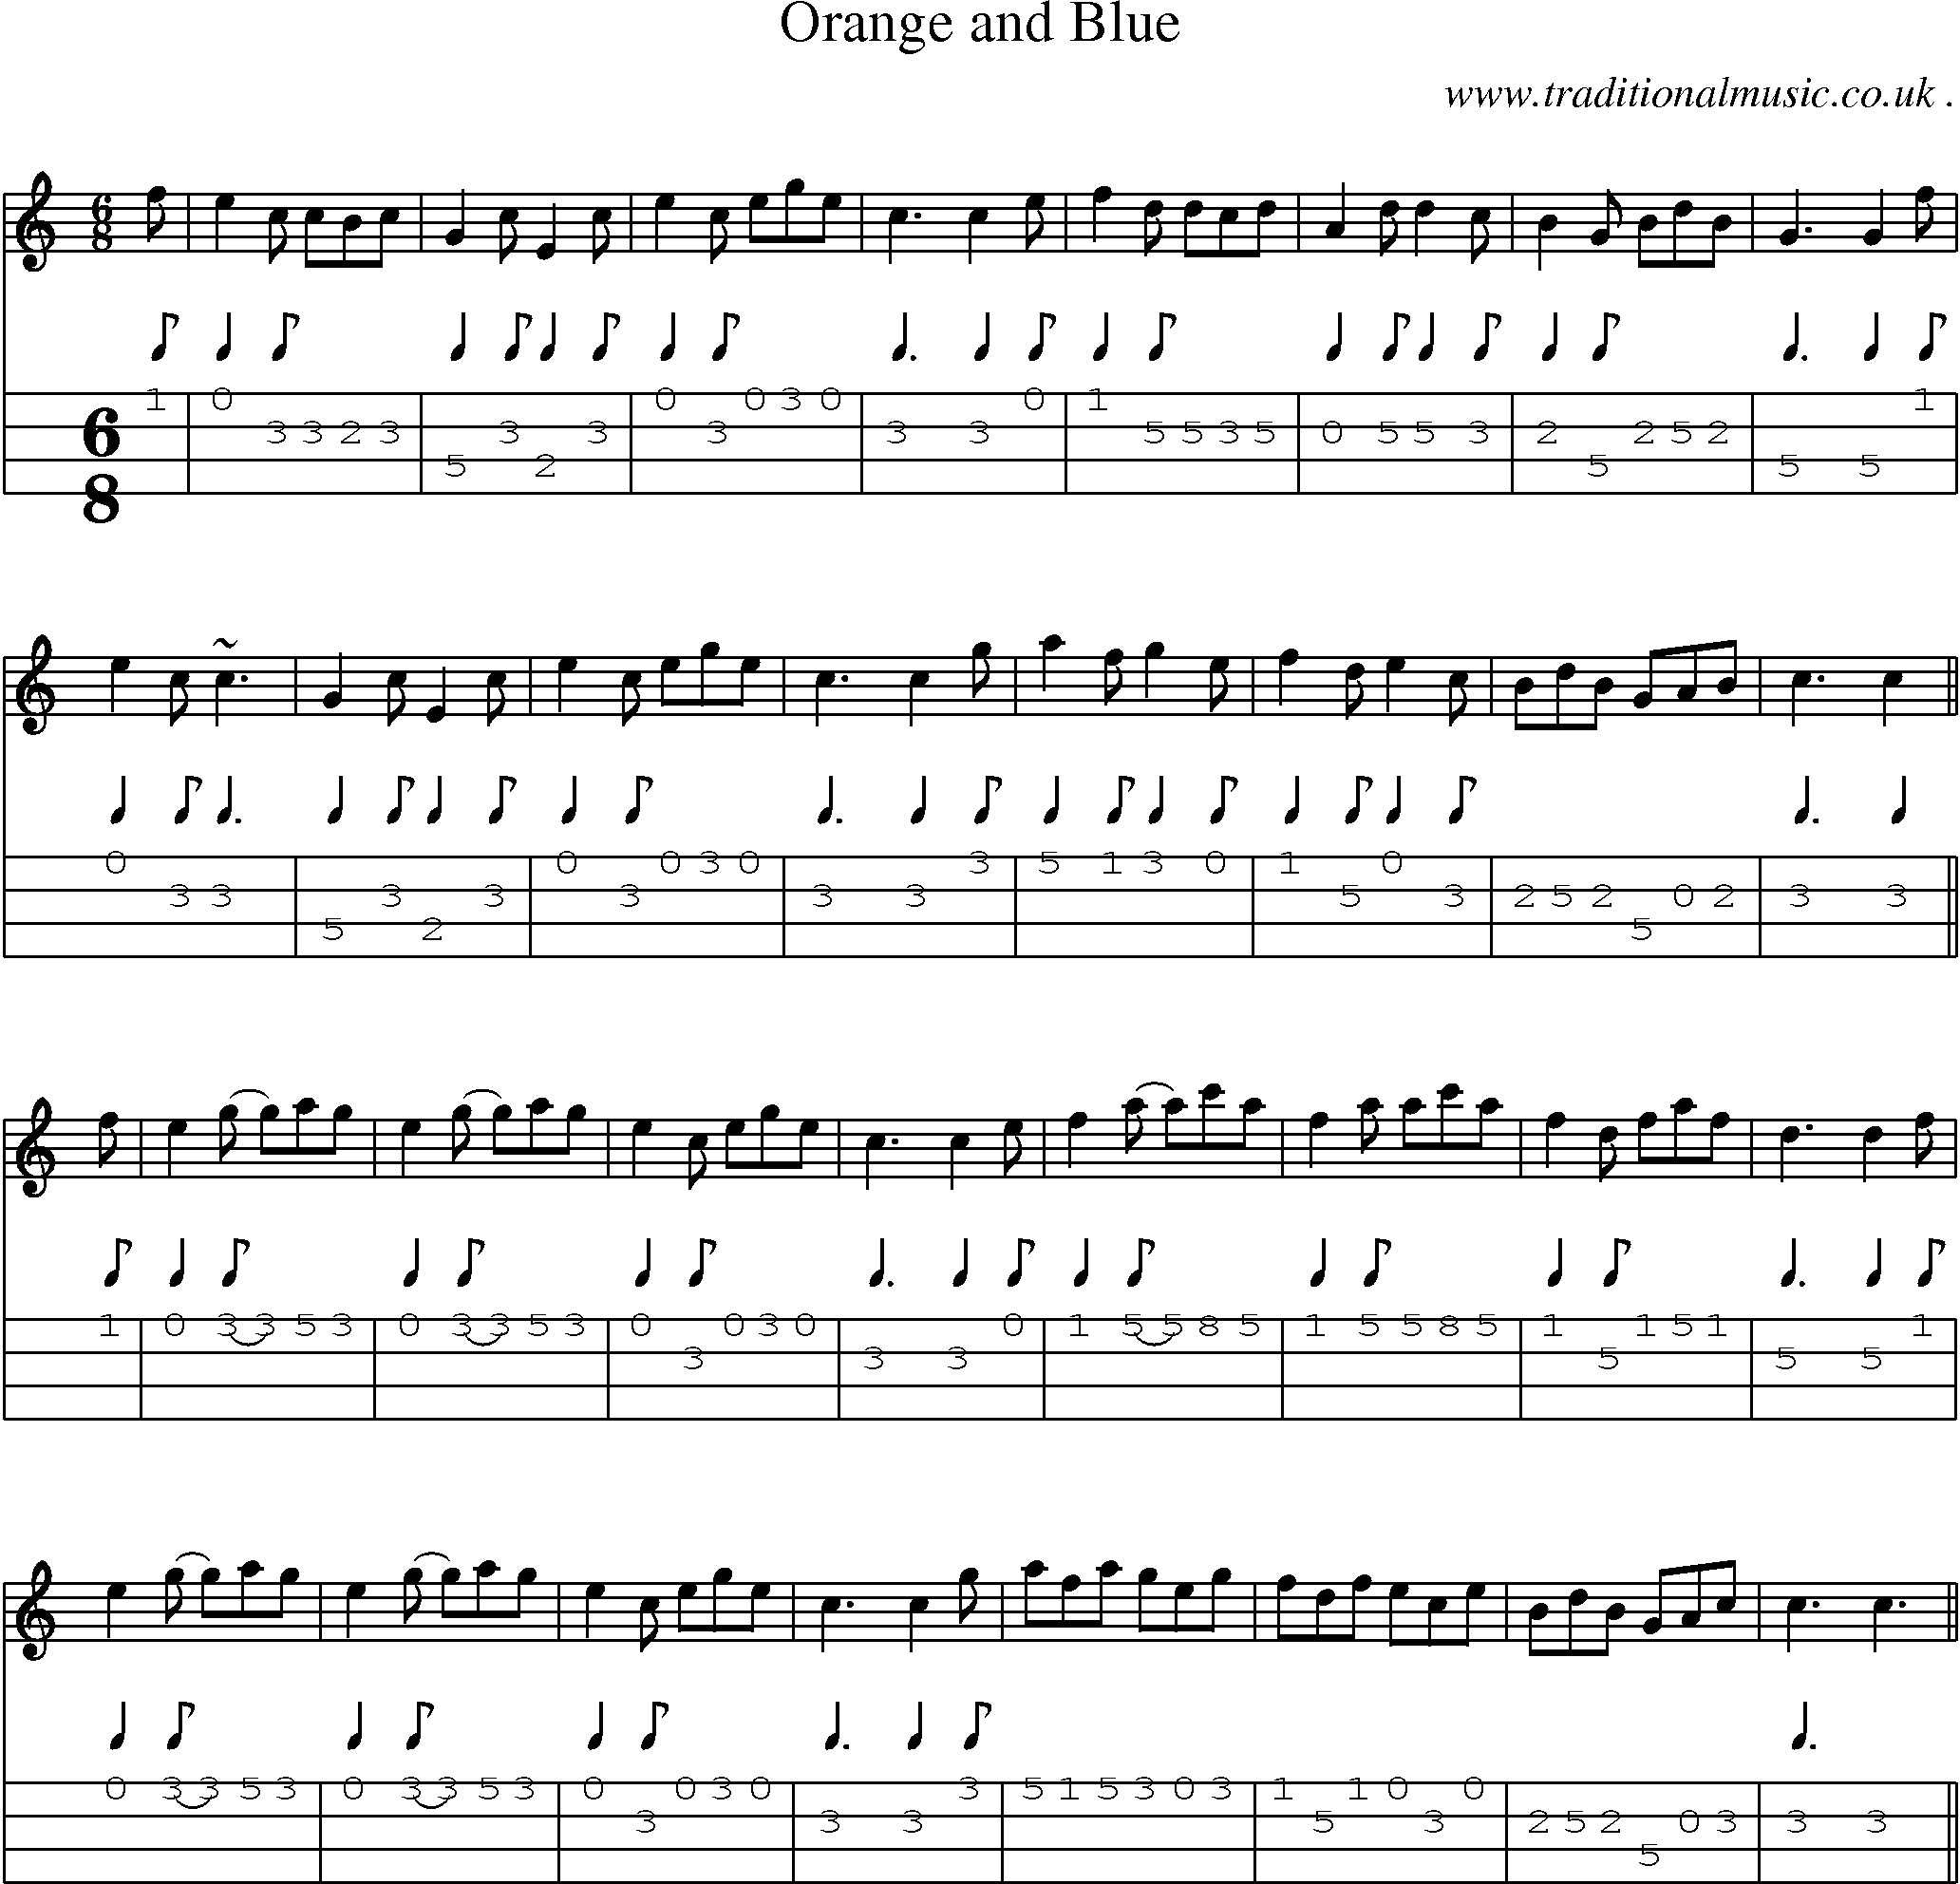 Sheet-music  score, Chords and Mandolin Tabs for Orange And Blue